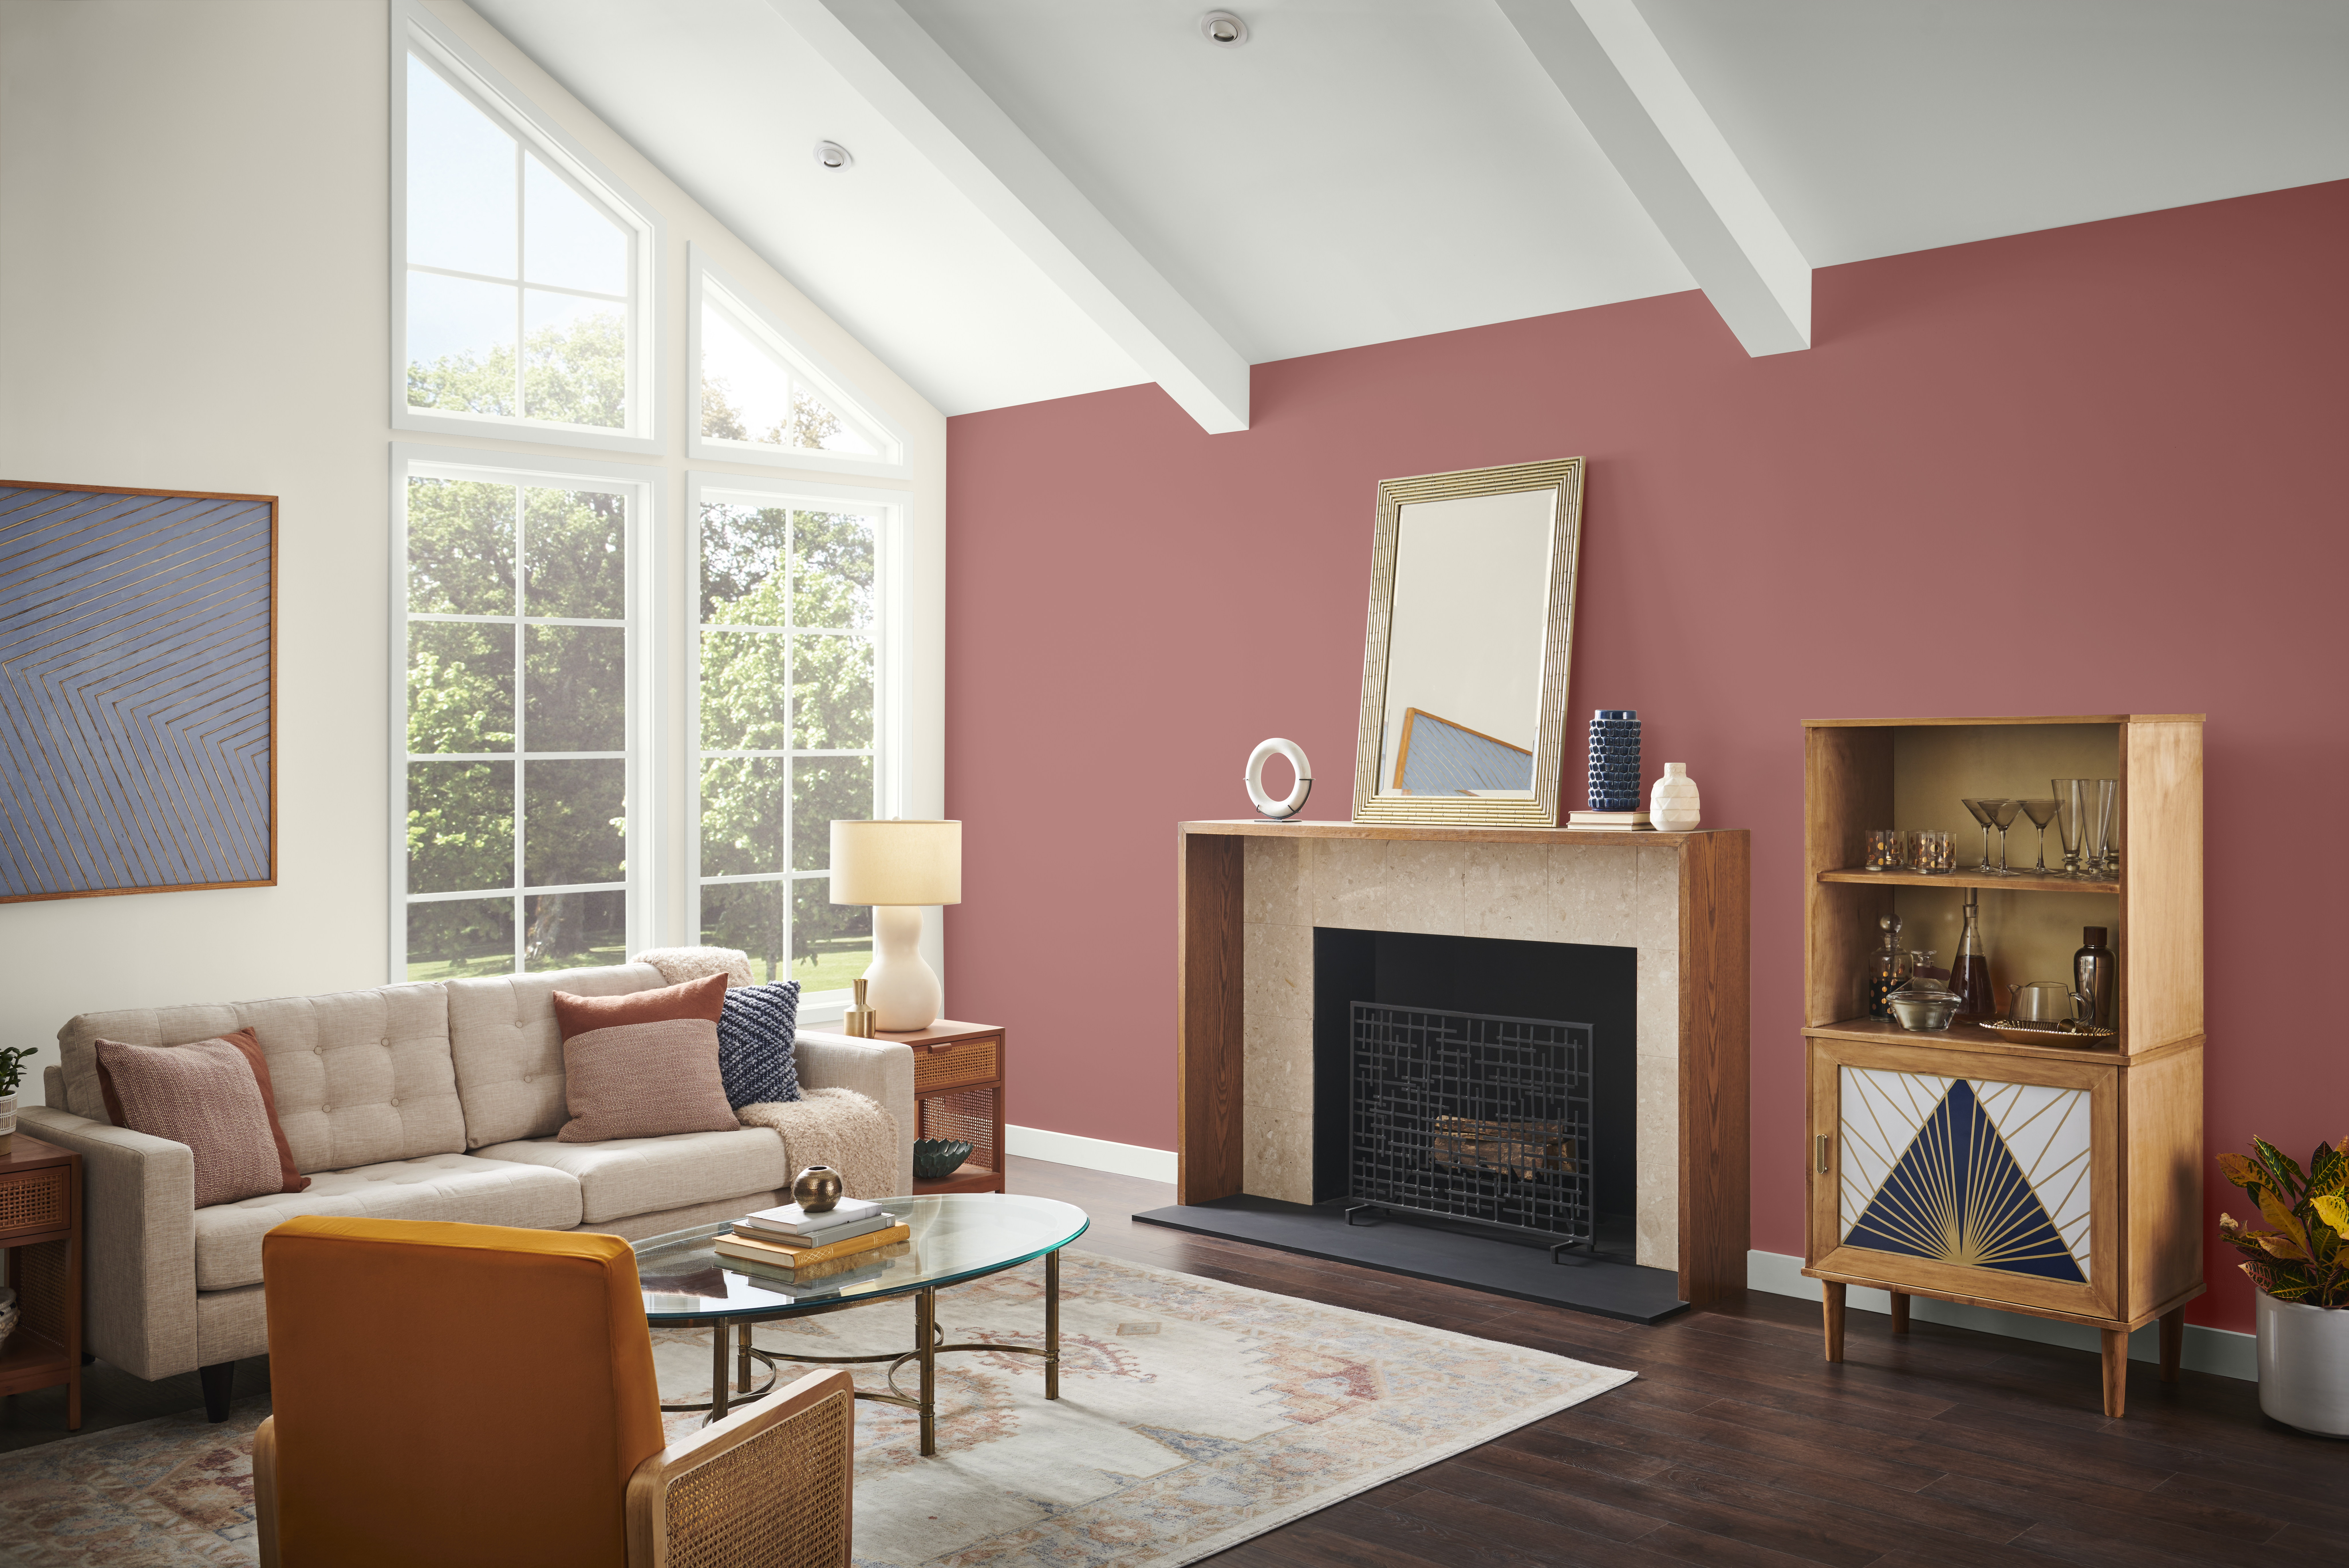 A living room with an accent wall in the colour Vermilion, styled with neutral furniture and décor 